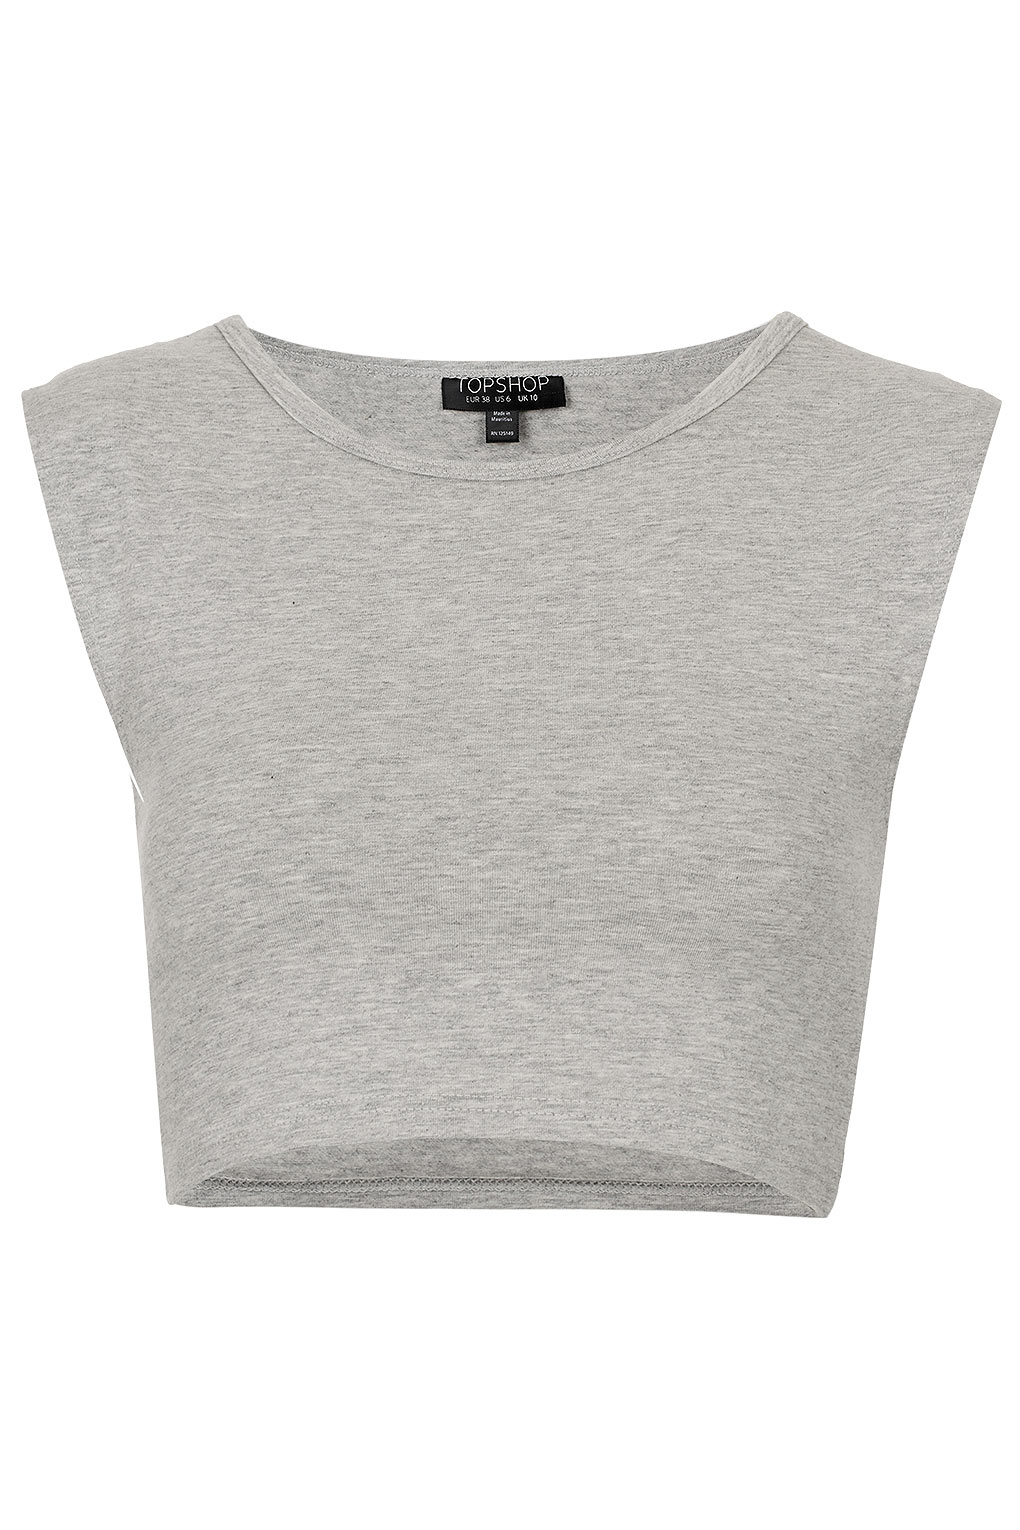 Lyst - Topshop Basic Sleeveless Crop Top in Gray